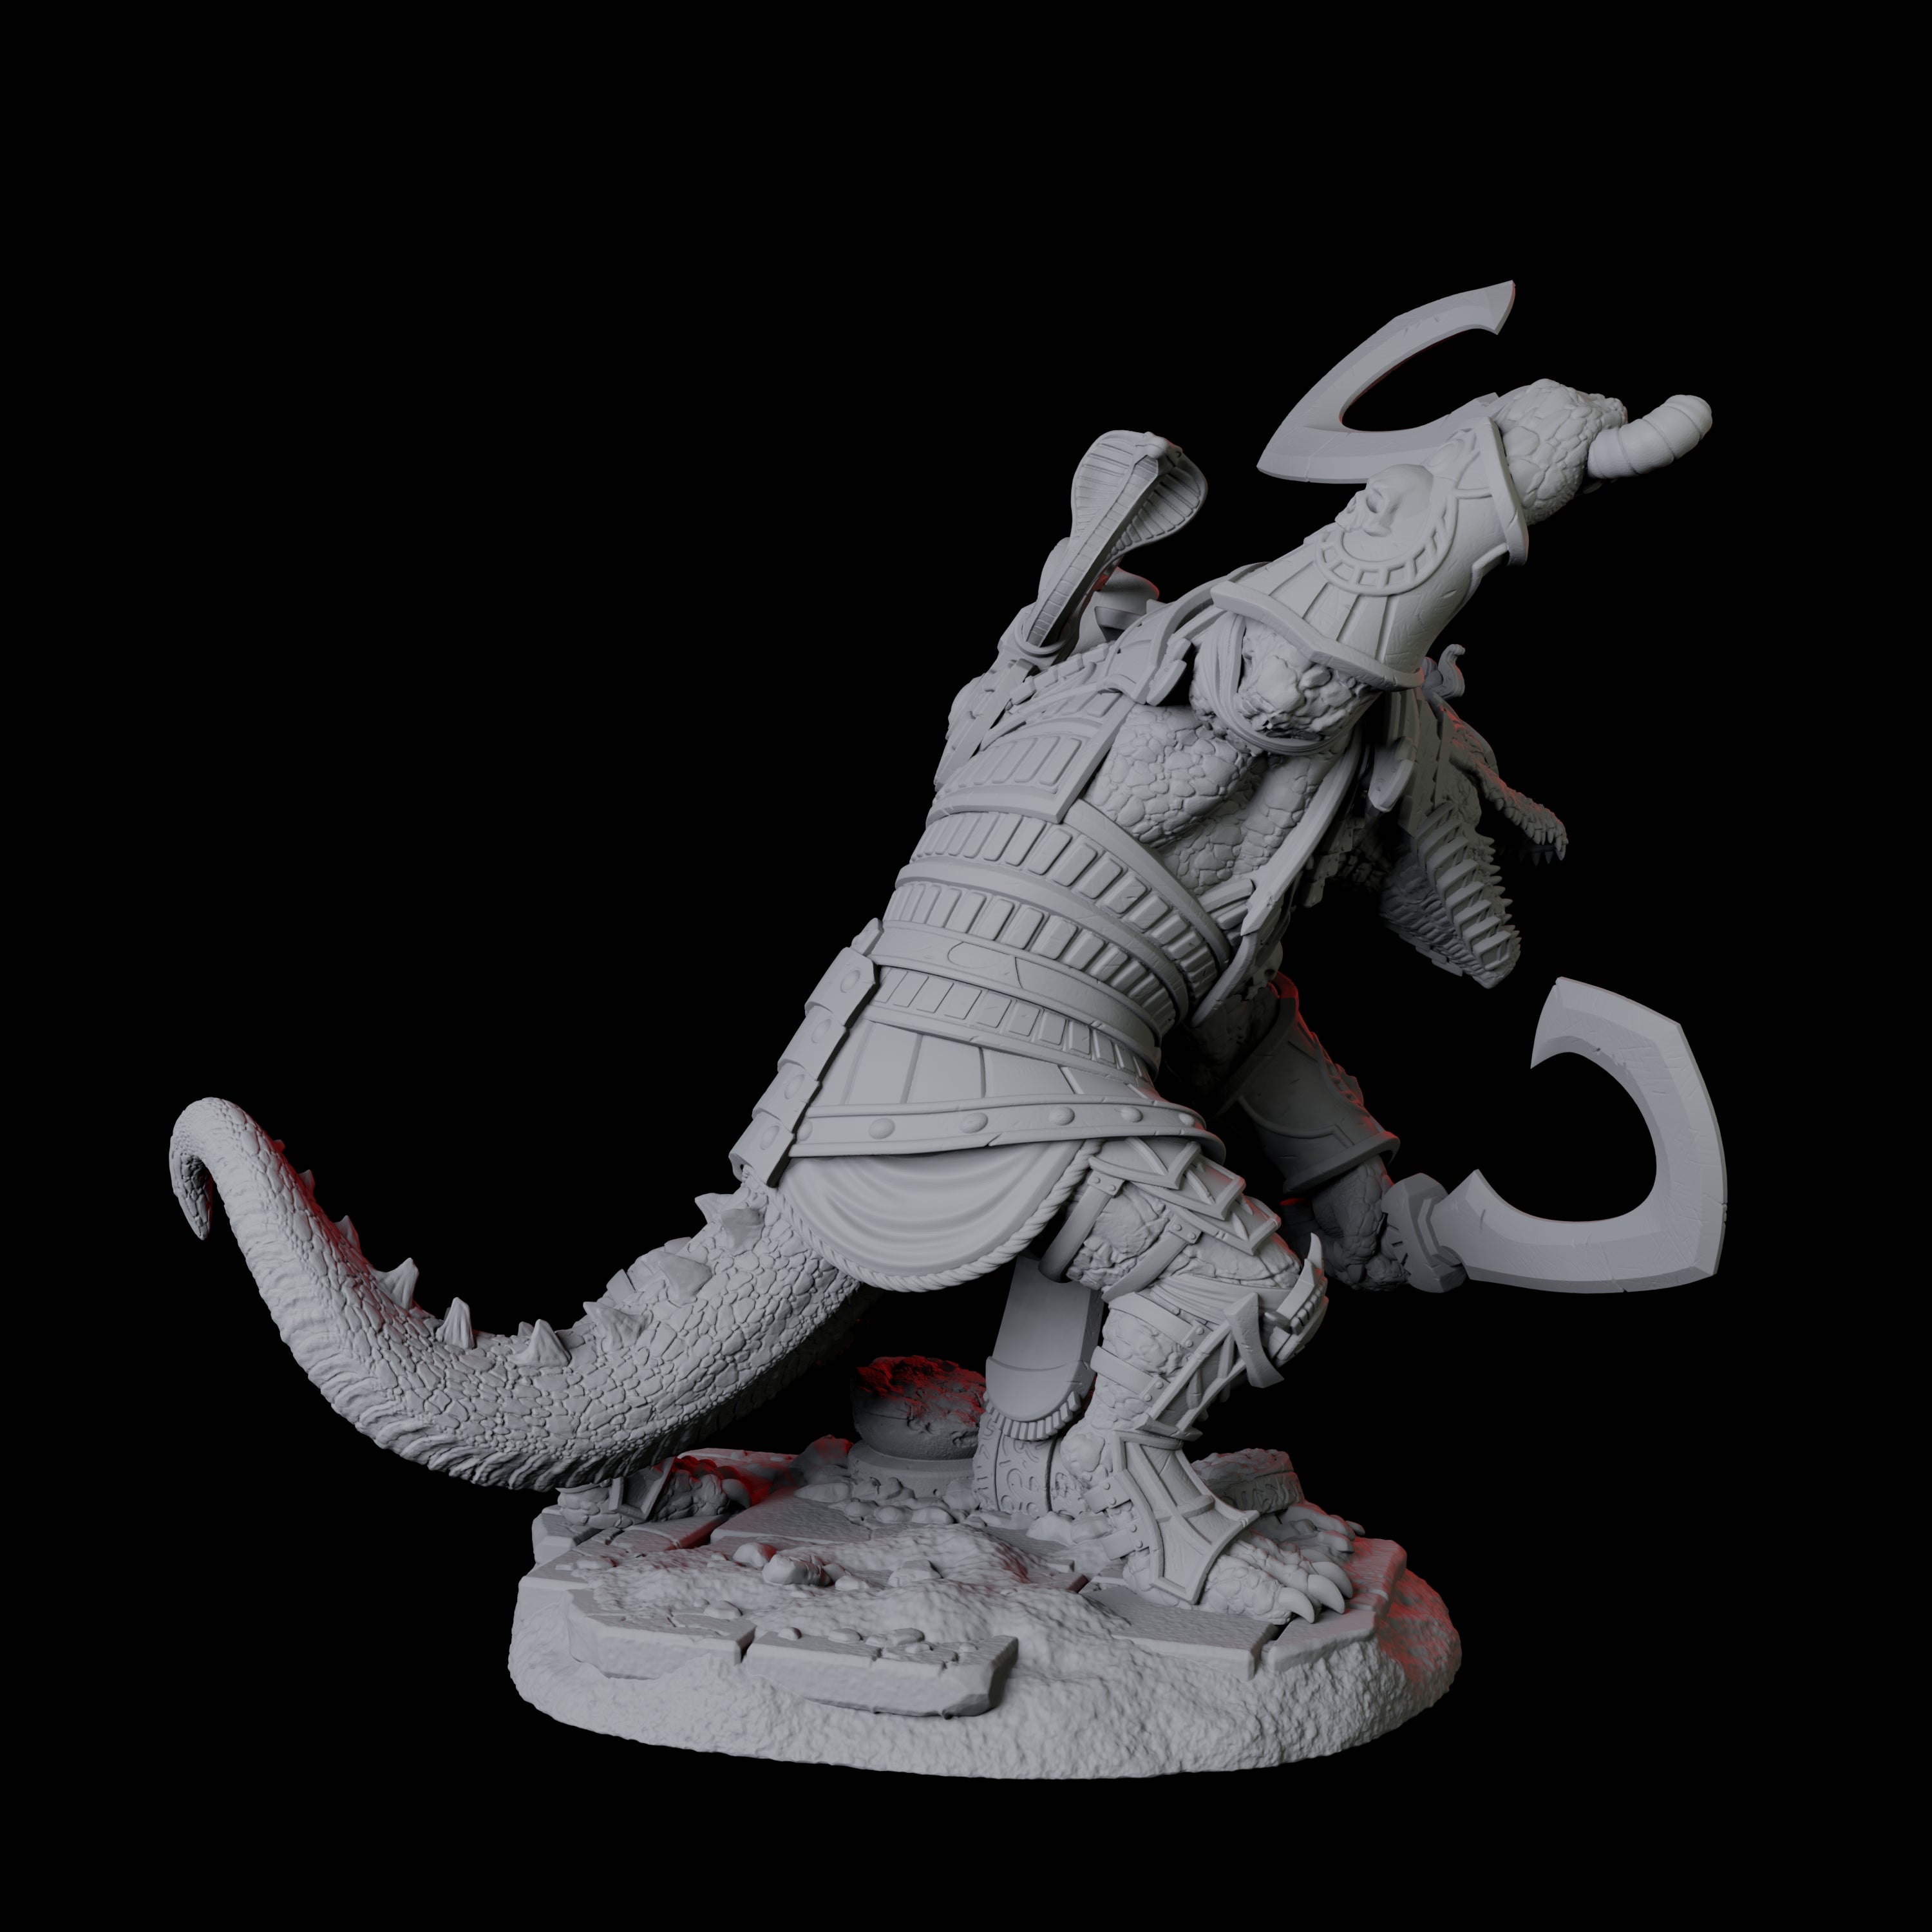 Charging Crocodile Lizardfolk Soldier A Miniature for Dungeons and Dragons, Pathfinder or other TTRPGs